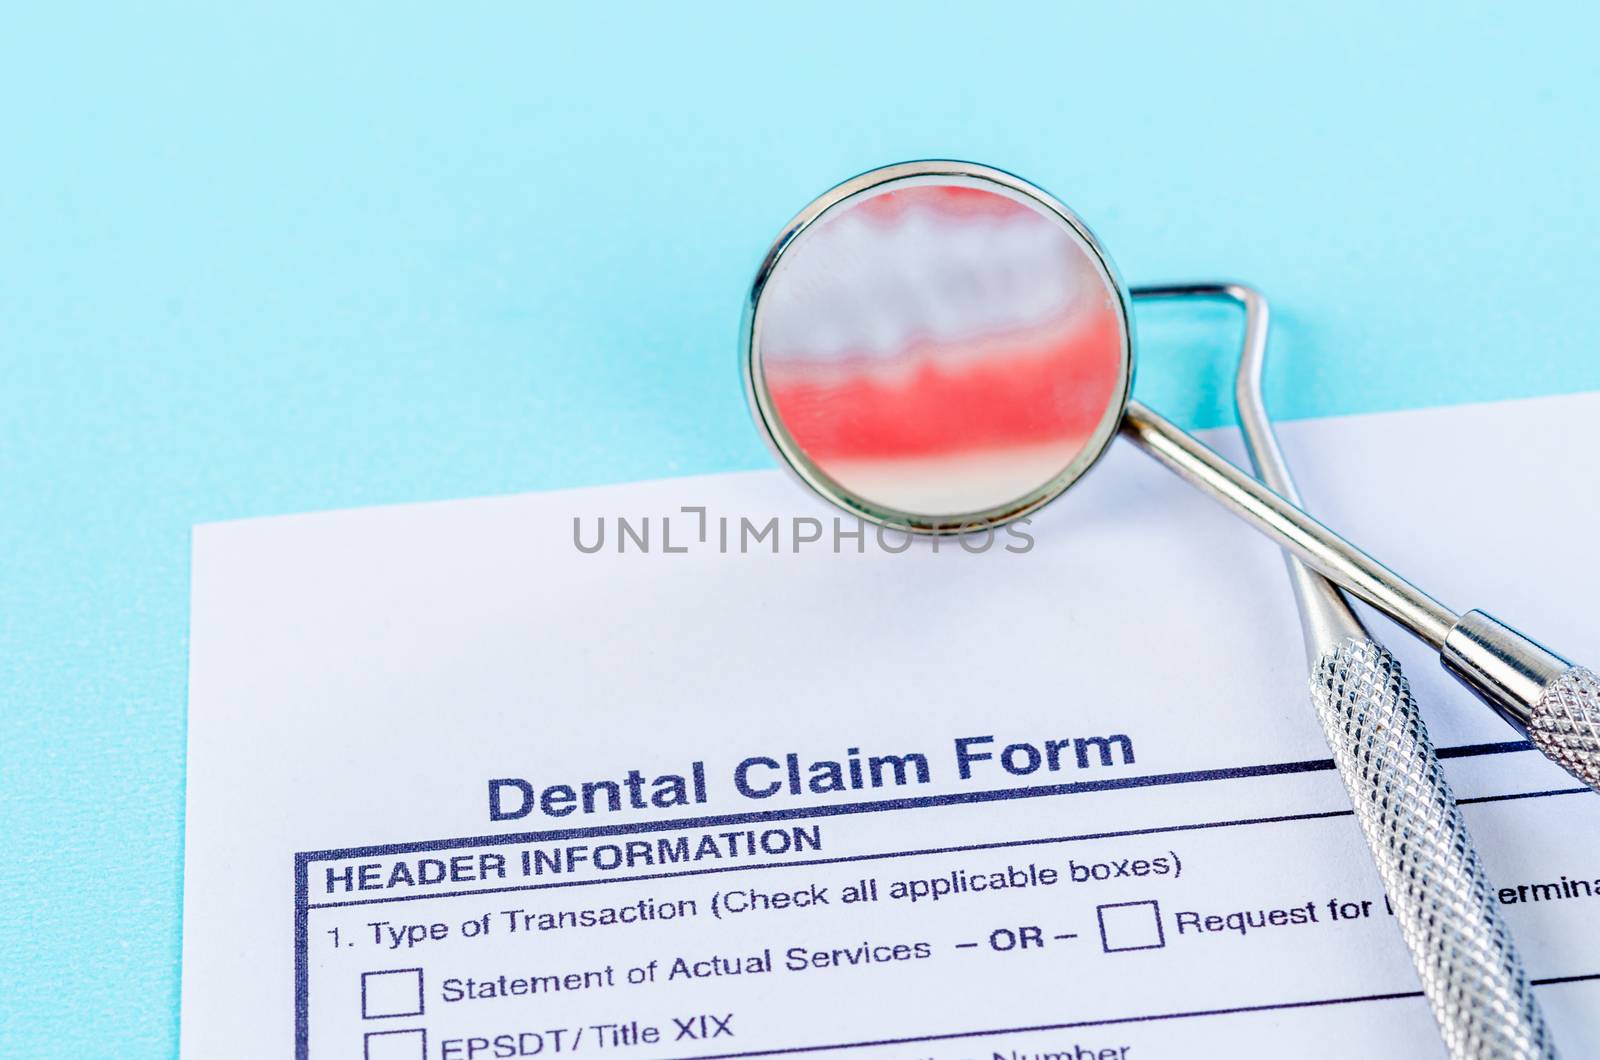 Dental claim Form with model tooth and dental instruments. by Gamjai